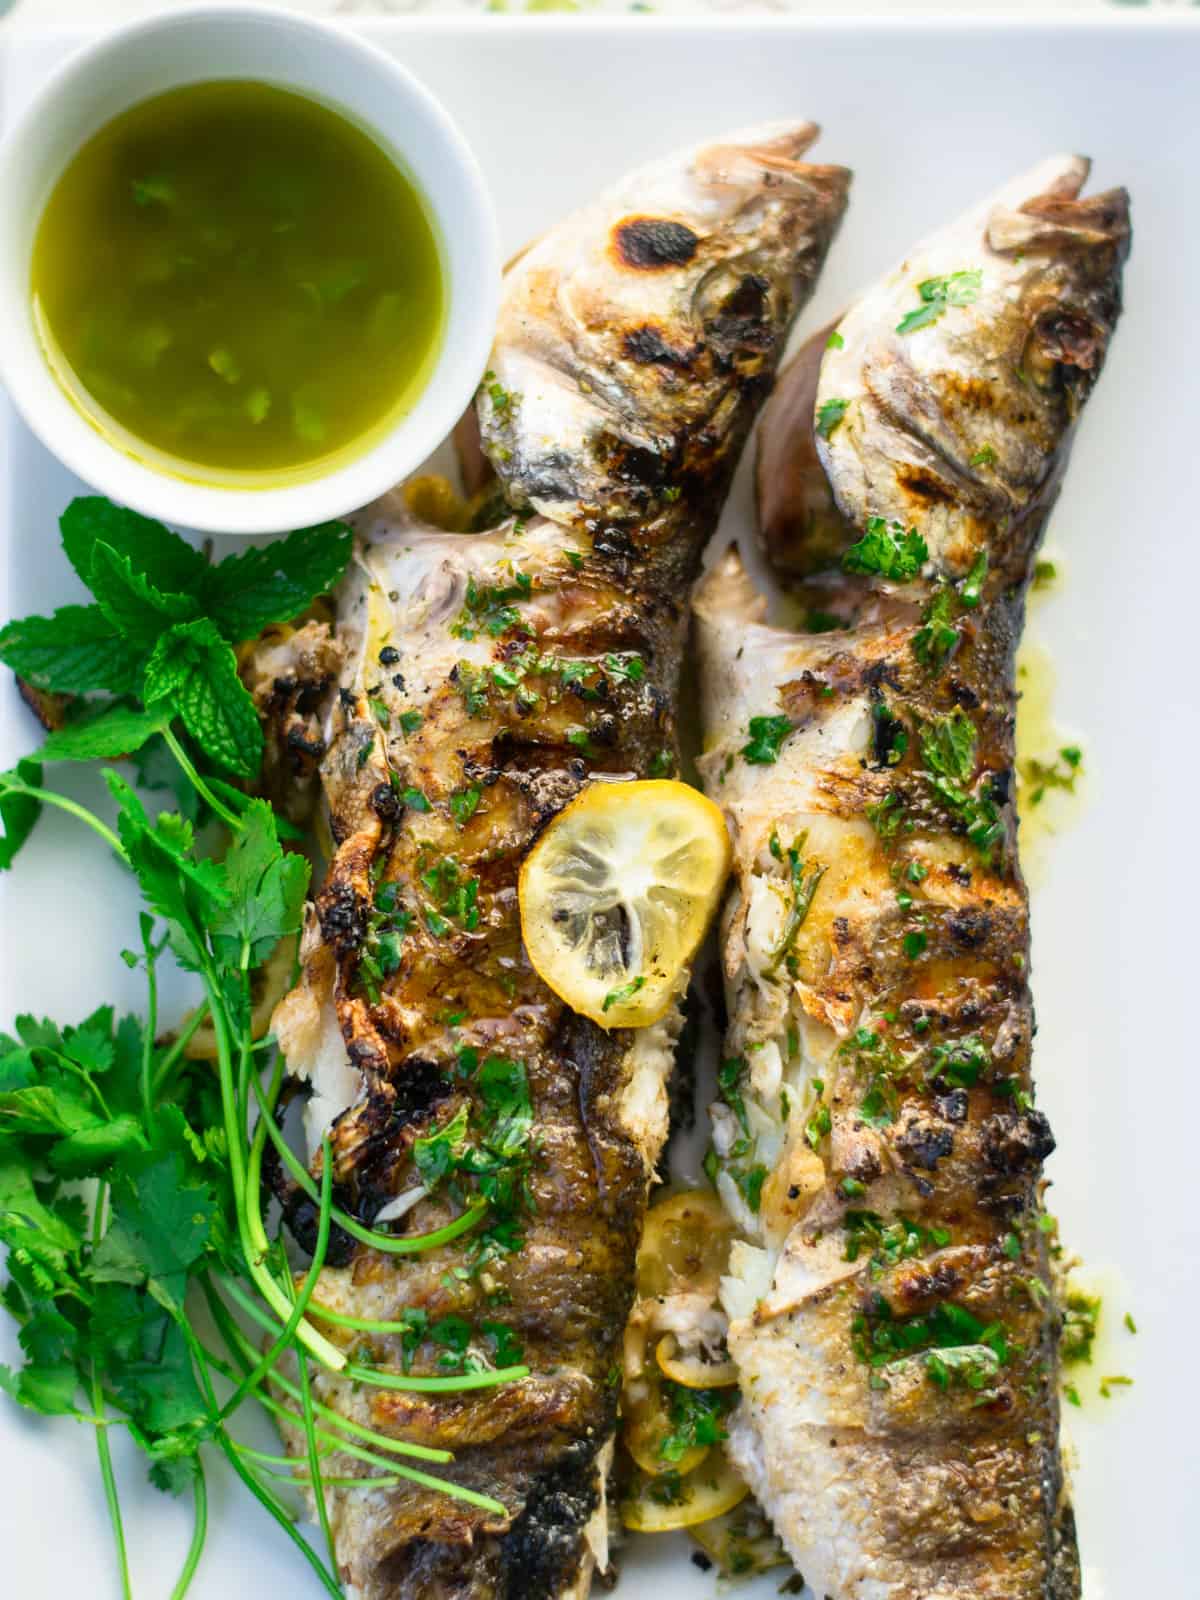 Whole grilled branzino with lemon and herbs.